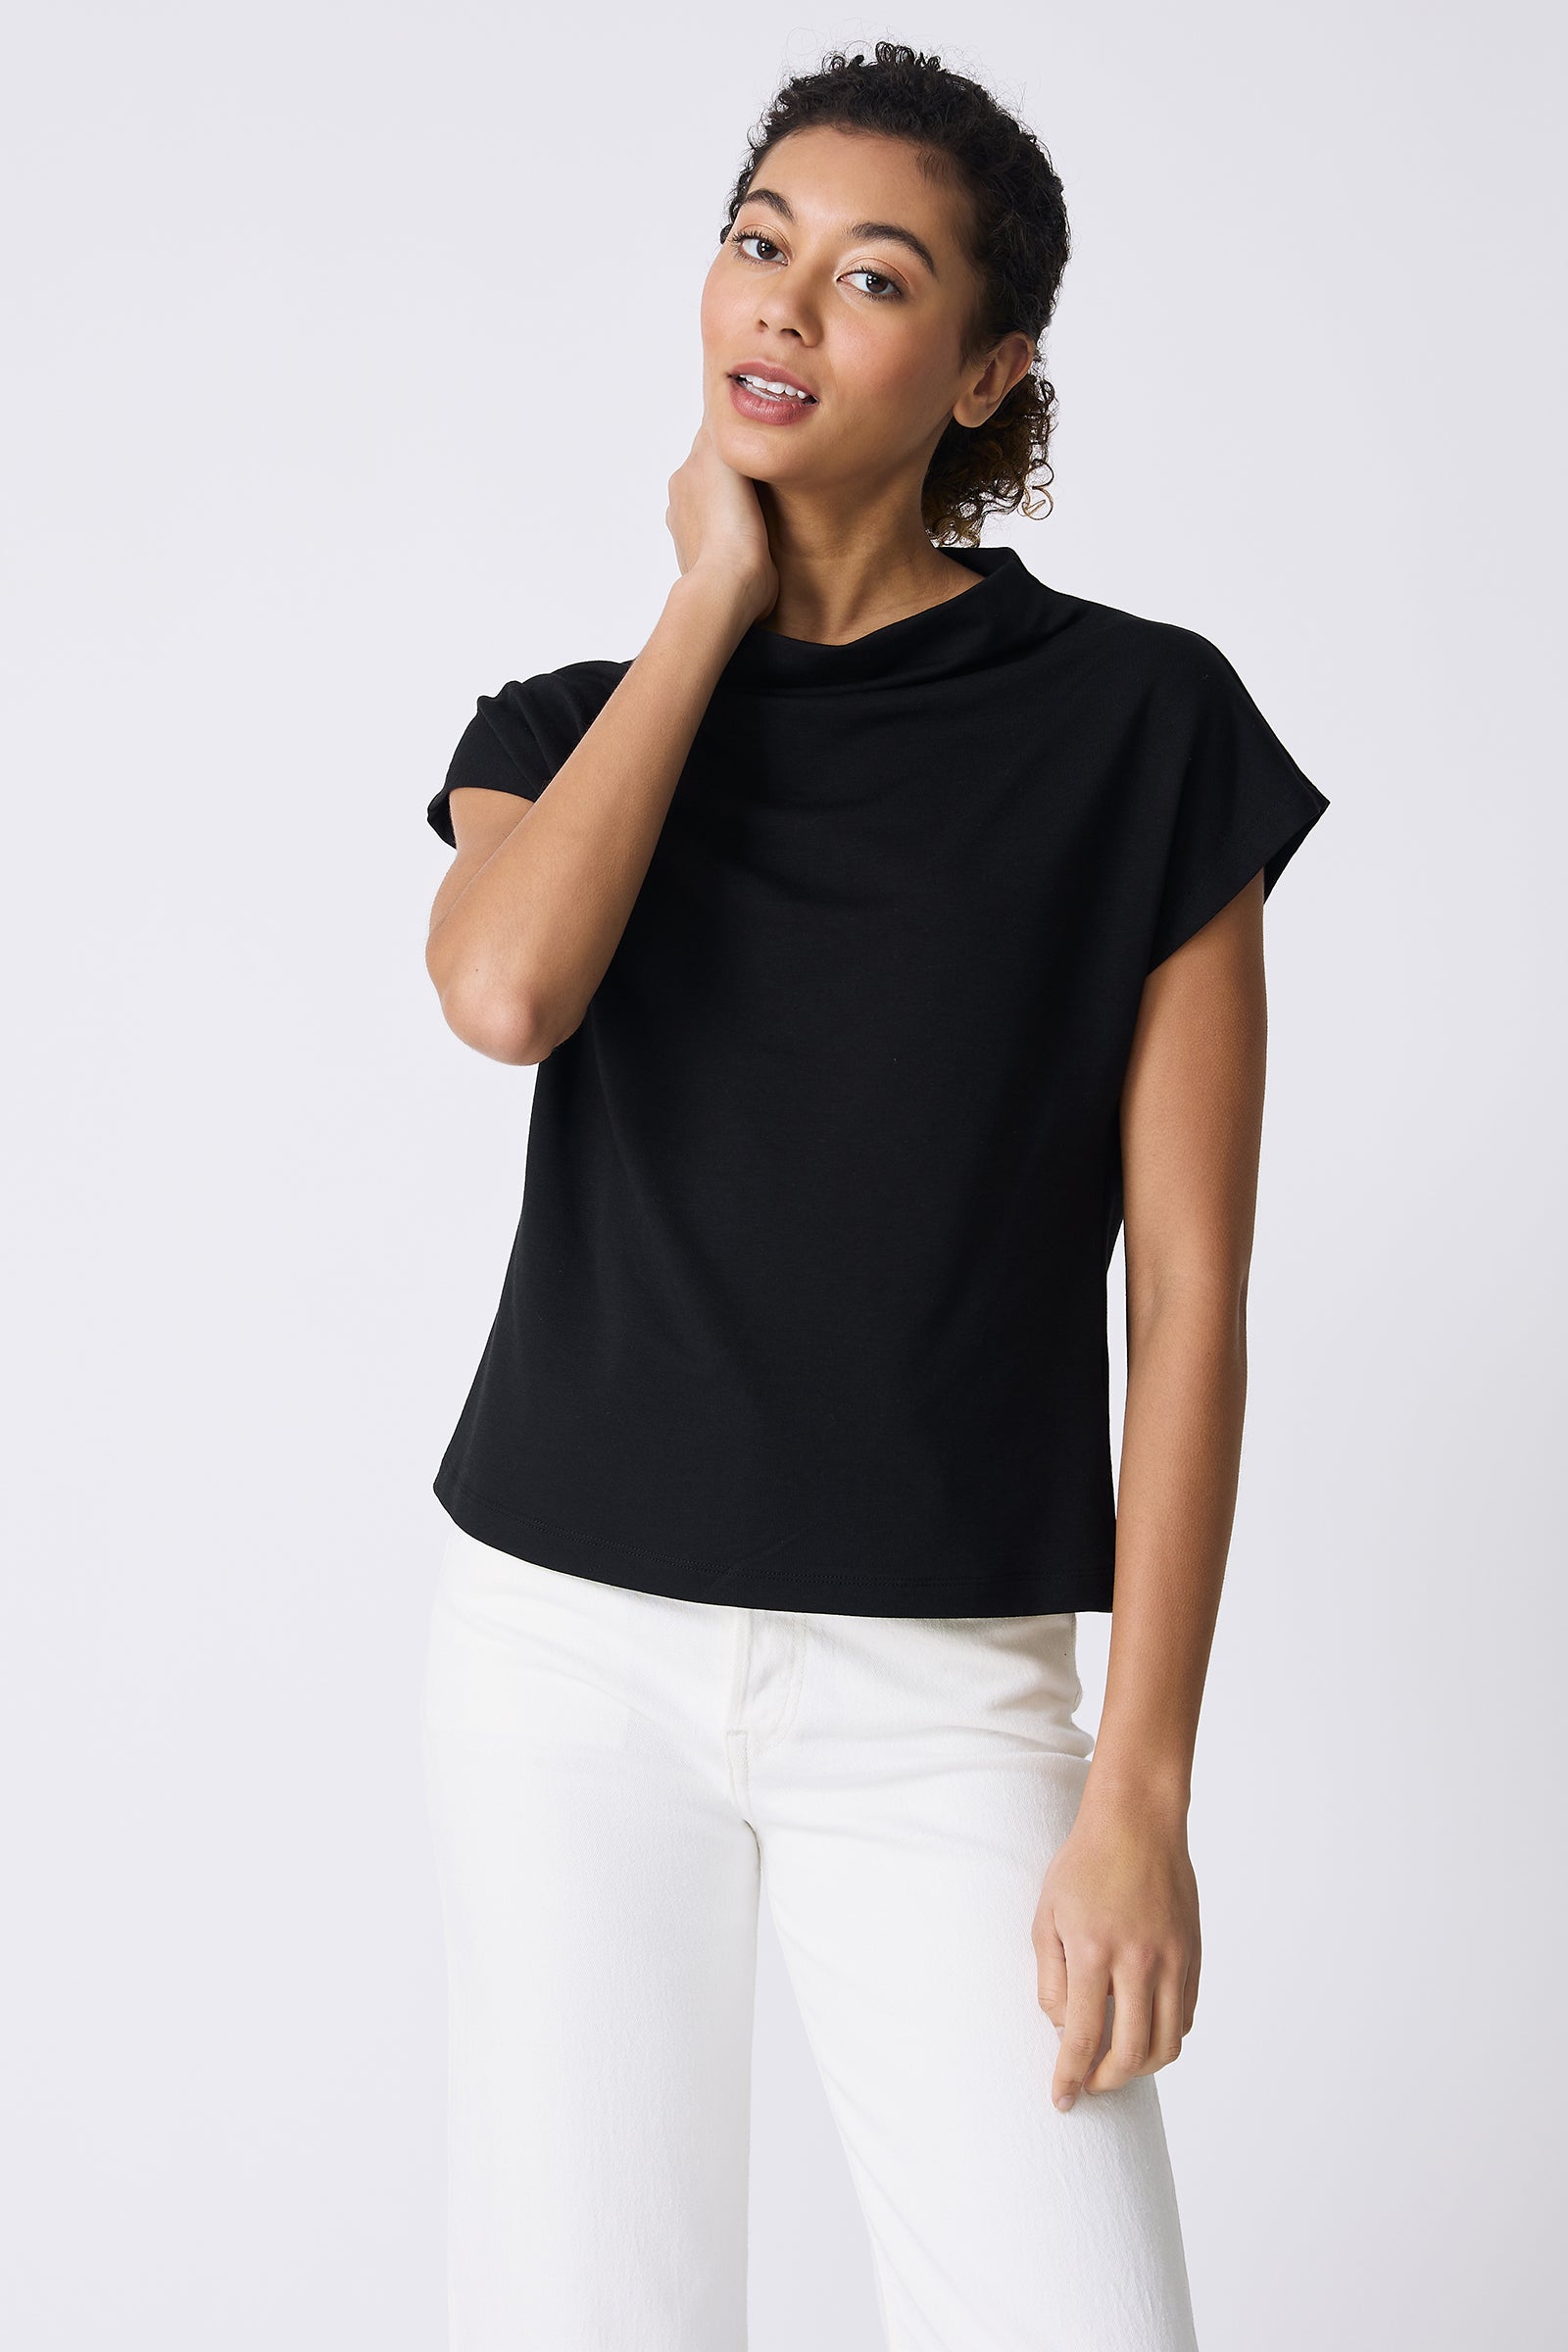 Kal Rieman Luca Cowl Top in Black on model with hand on neck front view